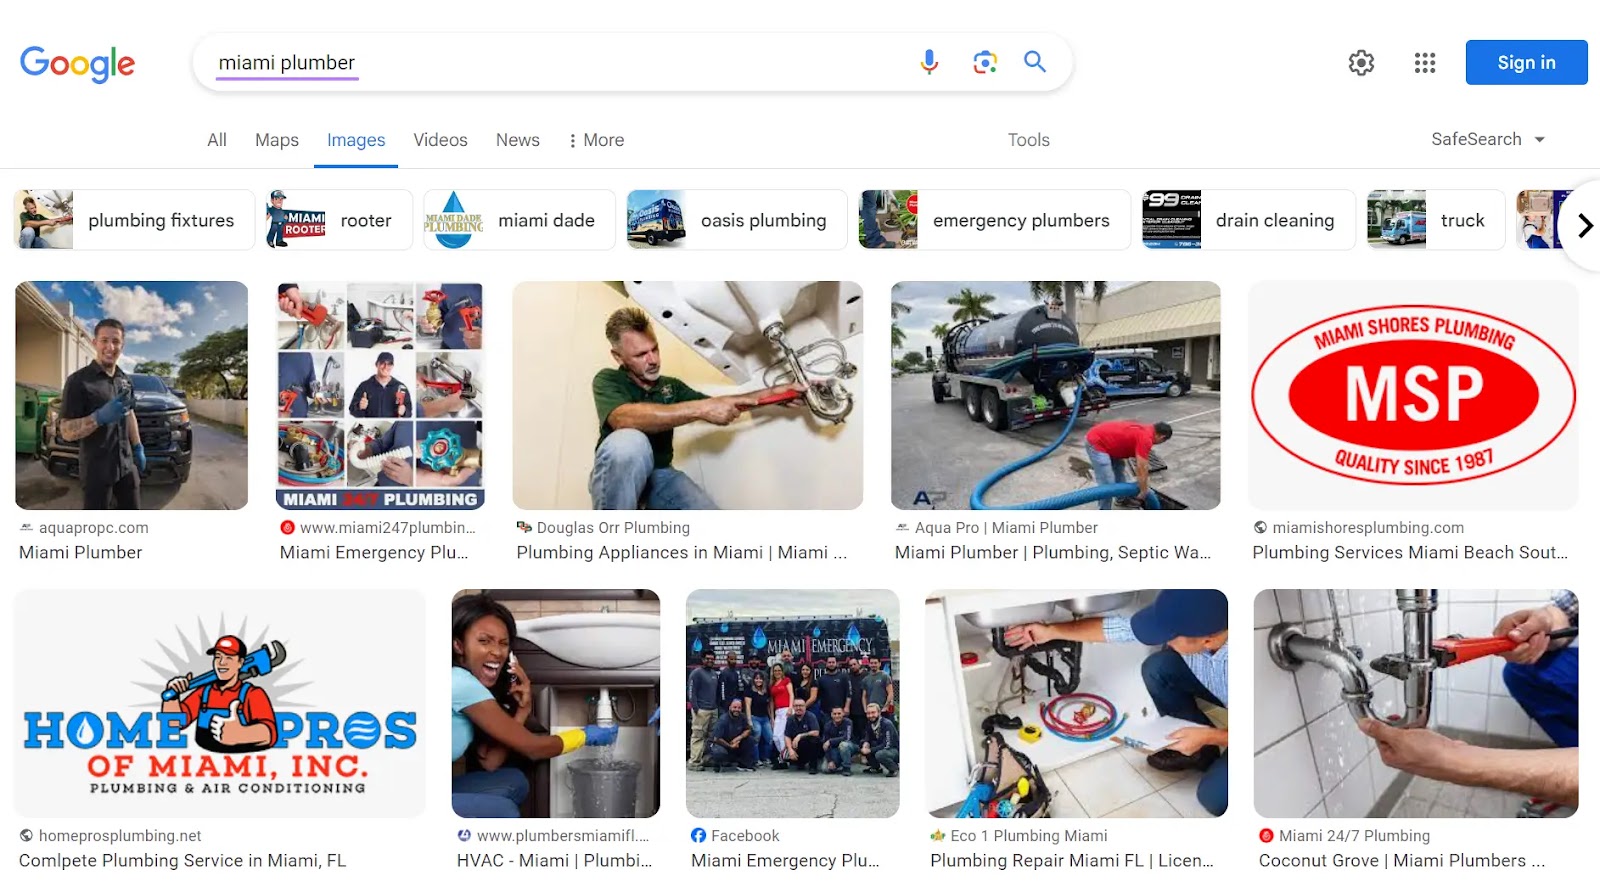 image results on Google for "miami plumber" search